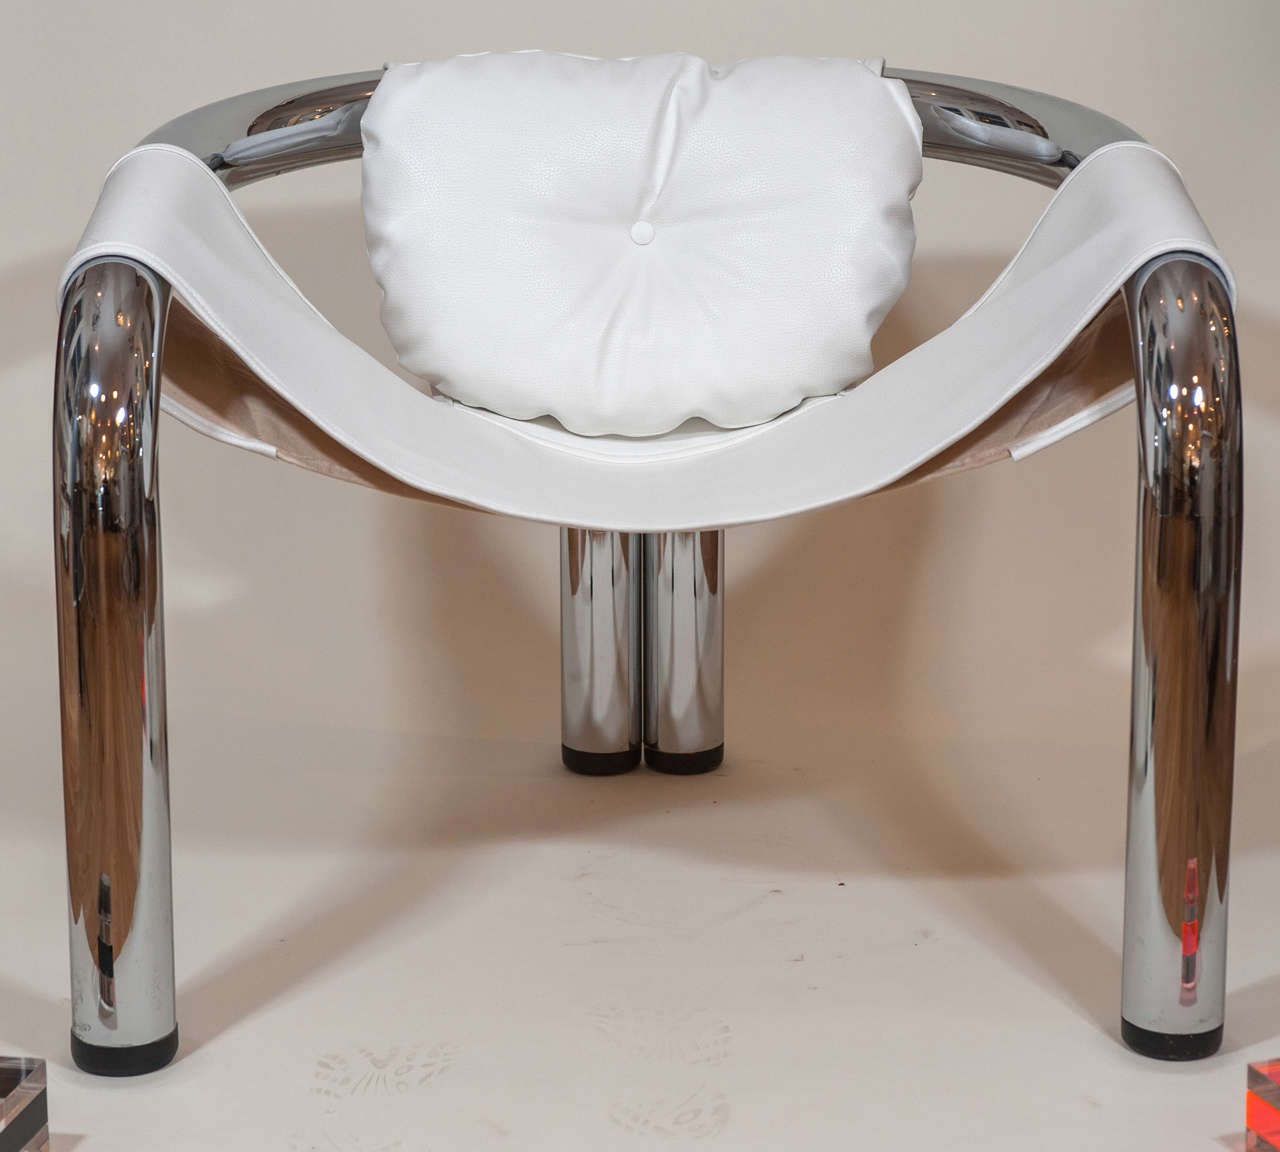 A cool 1970's chrome sling chair in new faux leather upholstery.